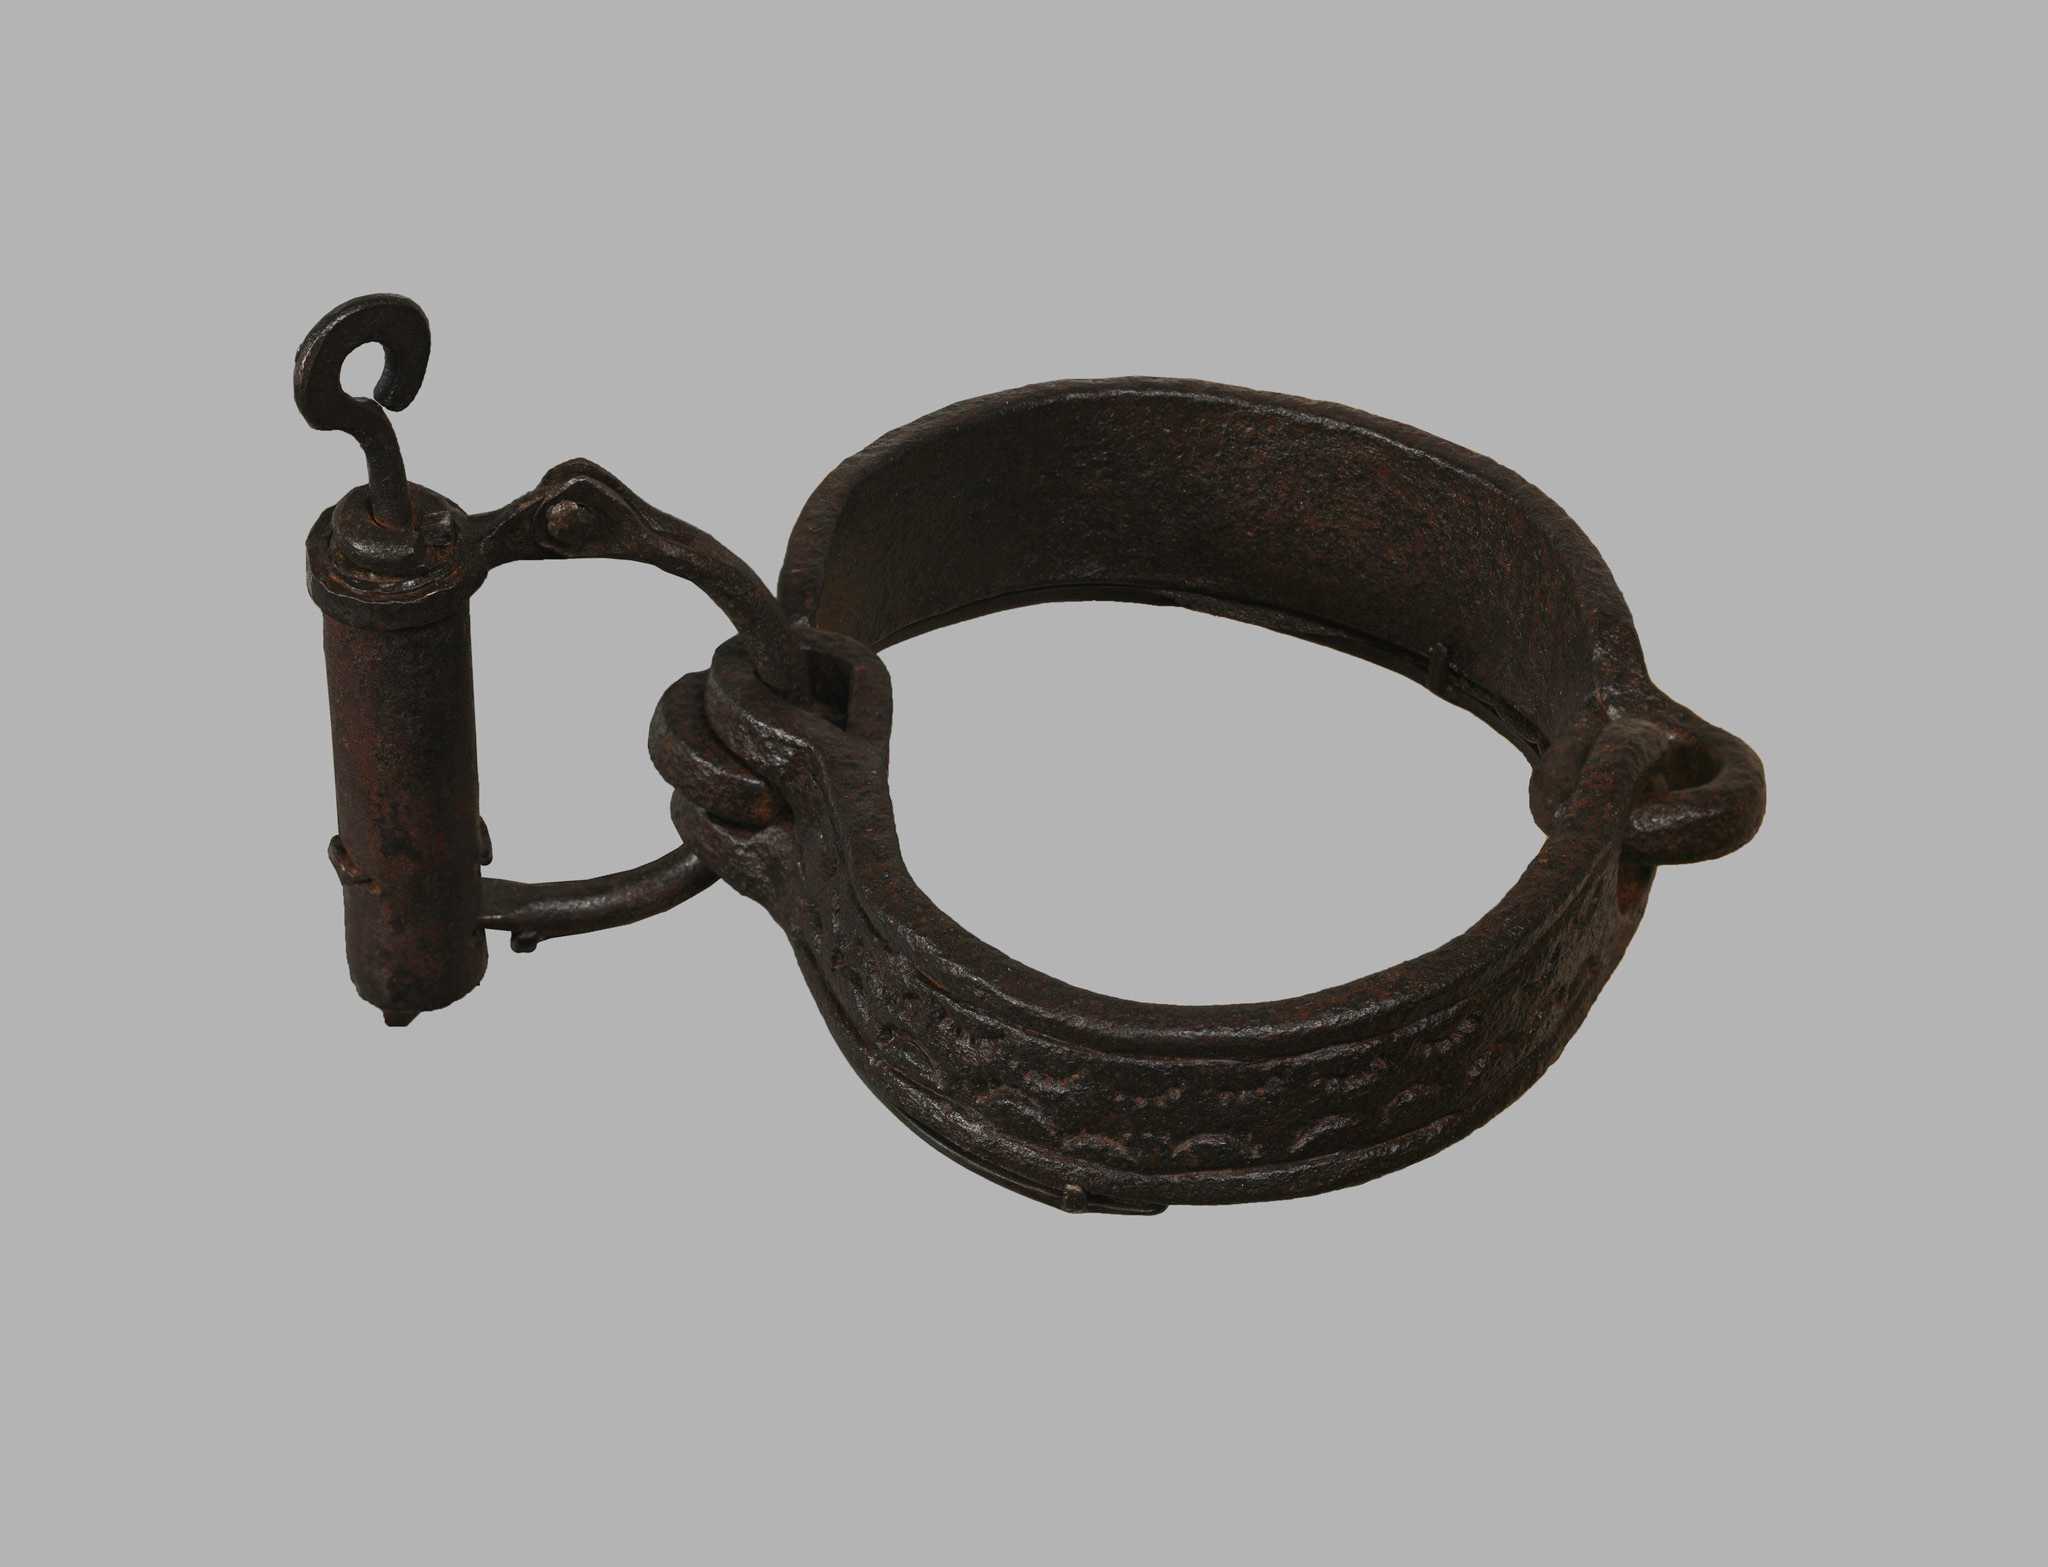 This wrought iron collar is formed of two pieces of semicircular iron joined together by two interlocking metal loops. At each end of the two pieces are another two rings. Through these are looped a D-shaped ring attached to a locking mechanism. The outer surface of the two pieces has been incised with a repeating semi-circular design.